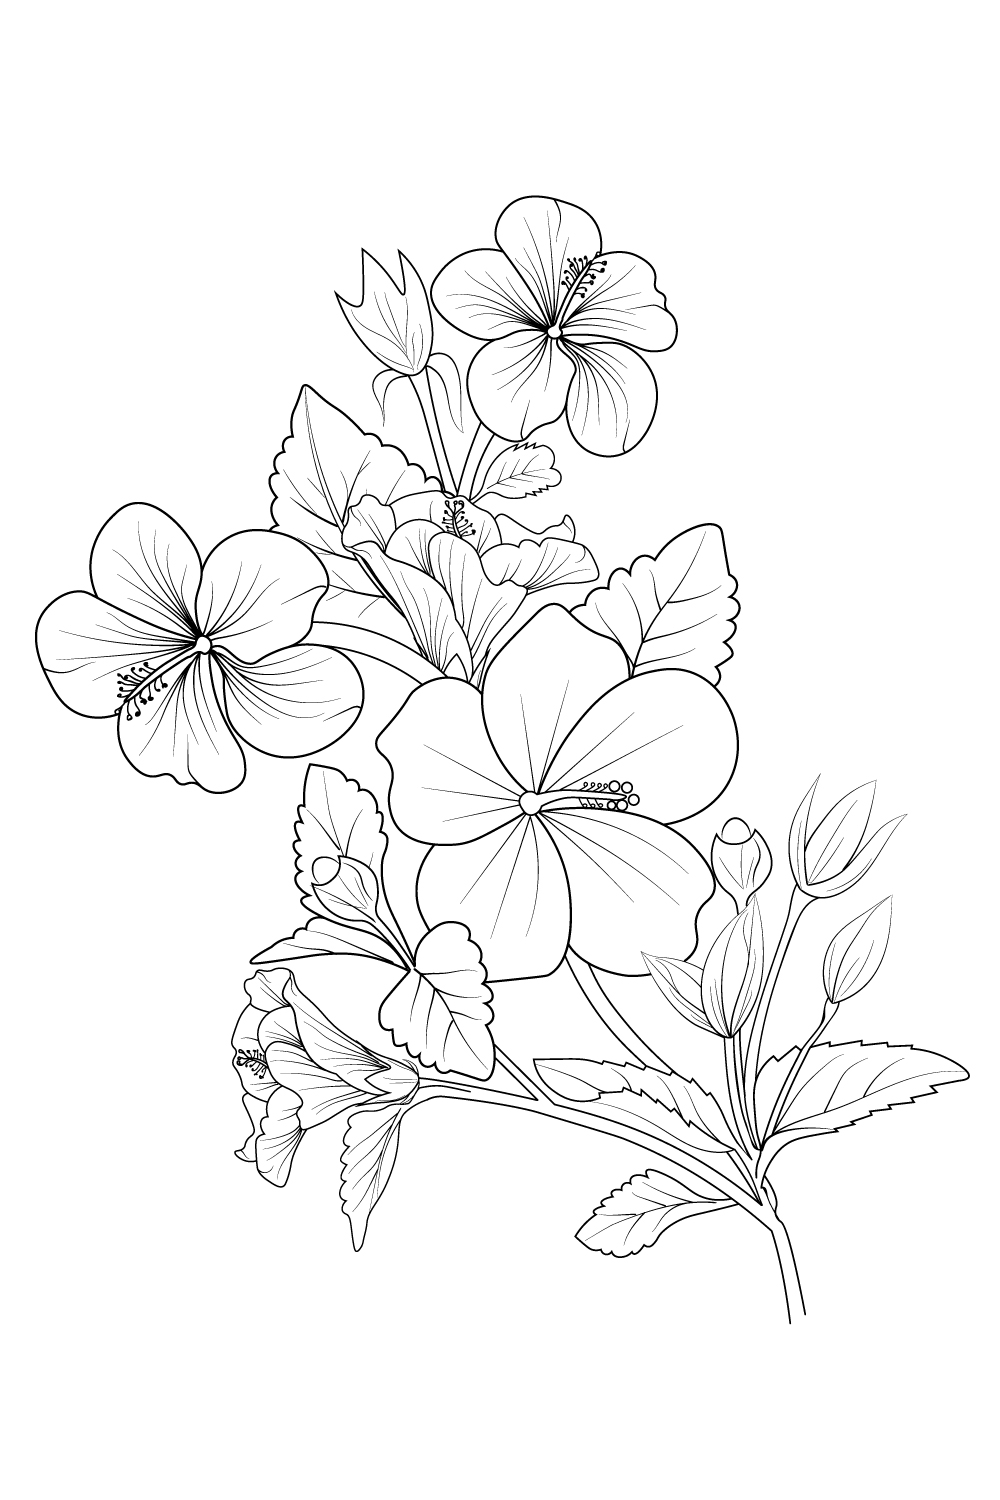 Blossom red hibiscus flower branch of botanical illustration, china rose flower drawing pinterest preview image.